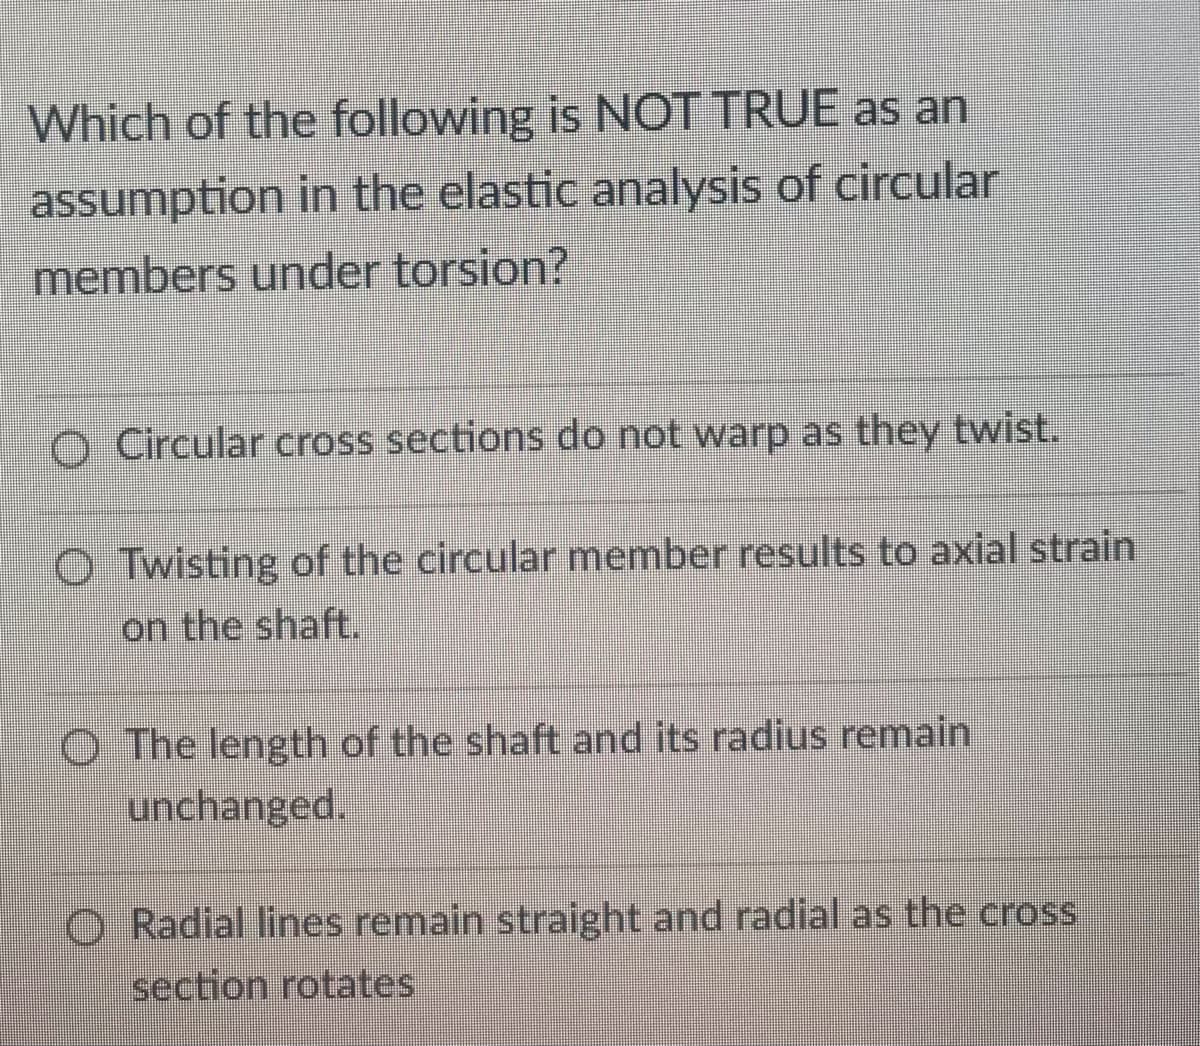 Which of the following is NOT TRUE as an
assumption in the elastic analysis of circular
members under torsion?
O Circular cross sections do not warp as they twist.
OTwisting of the circular member results to axial strain
on the shaft.
O The length of the shaft and its radius remain
unchanged.
Radial lines remain straight and radial as the cross
section rotates